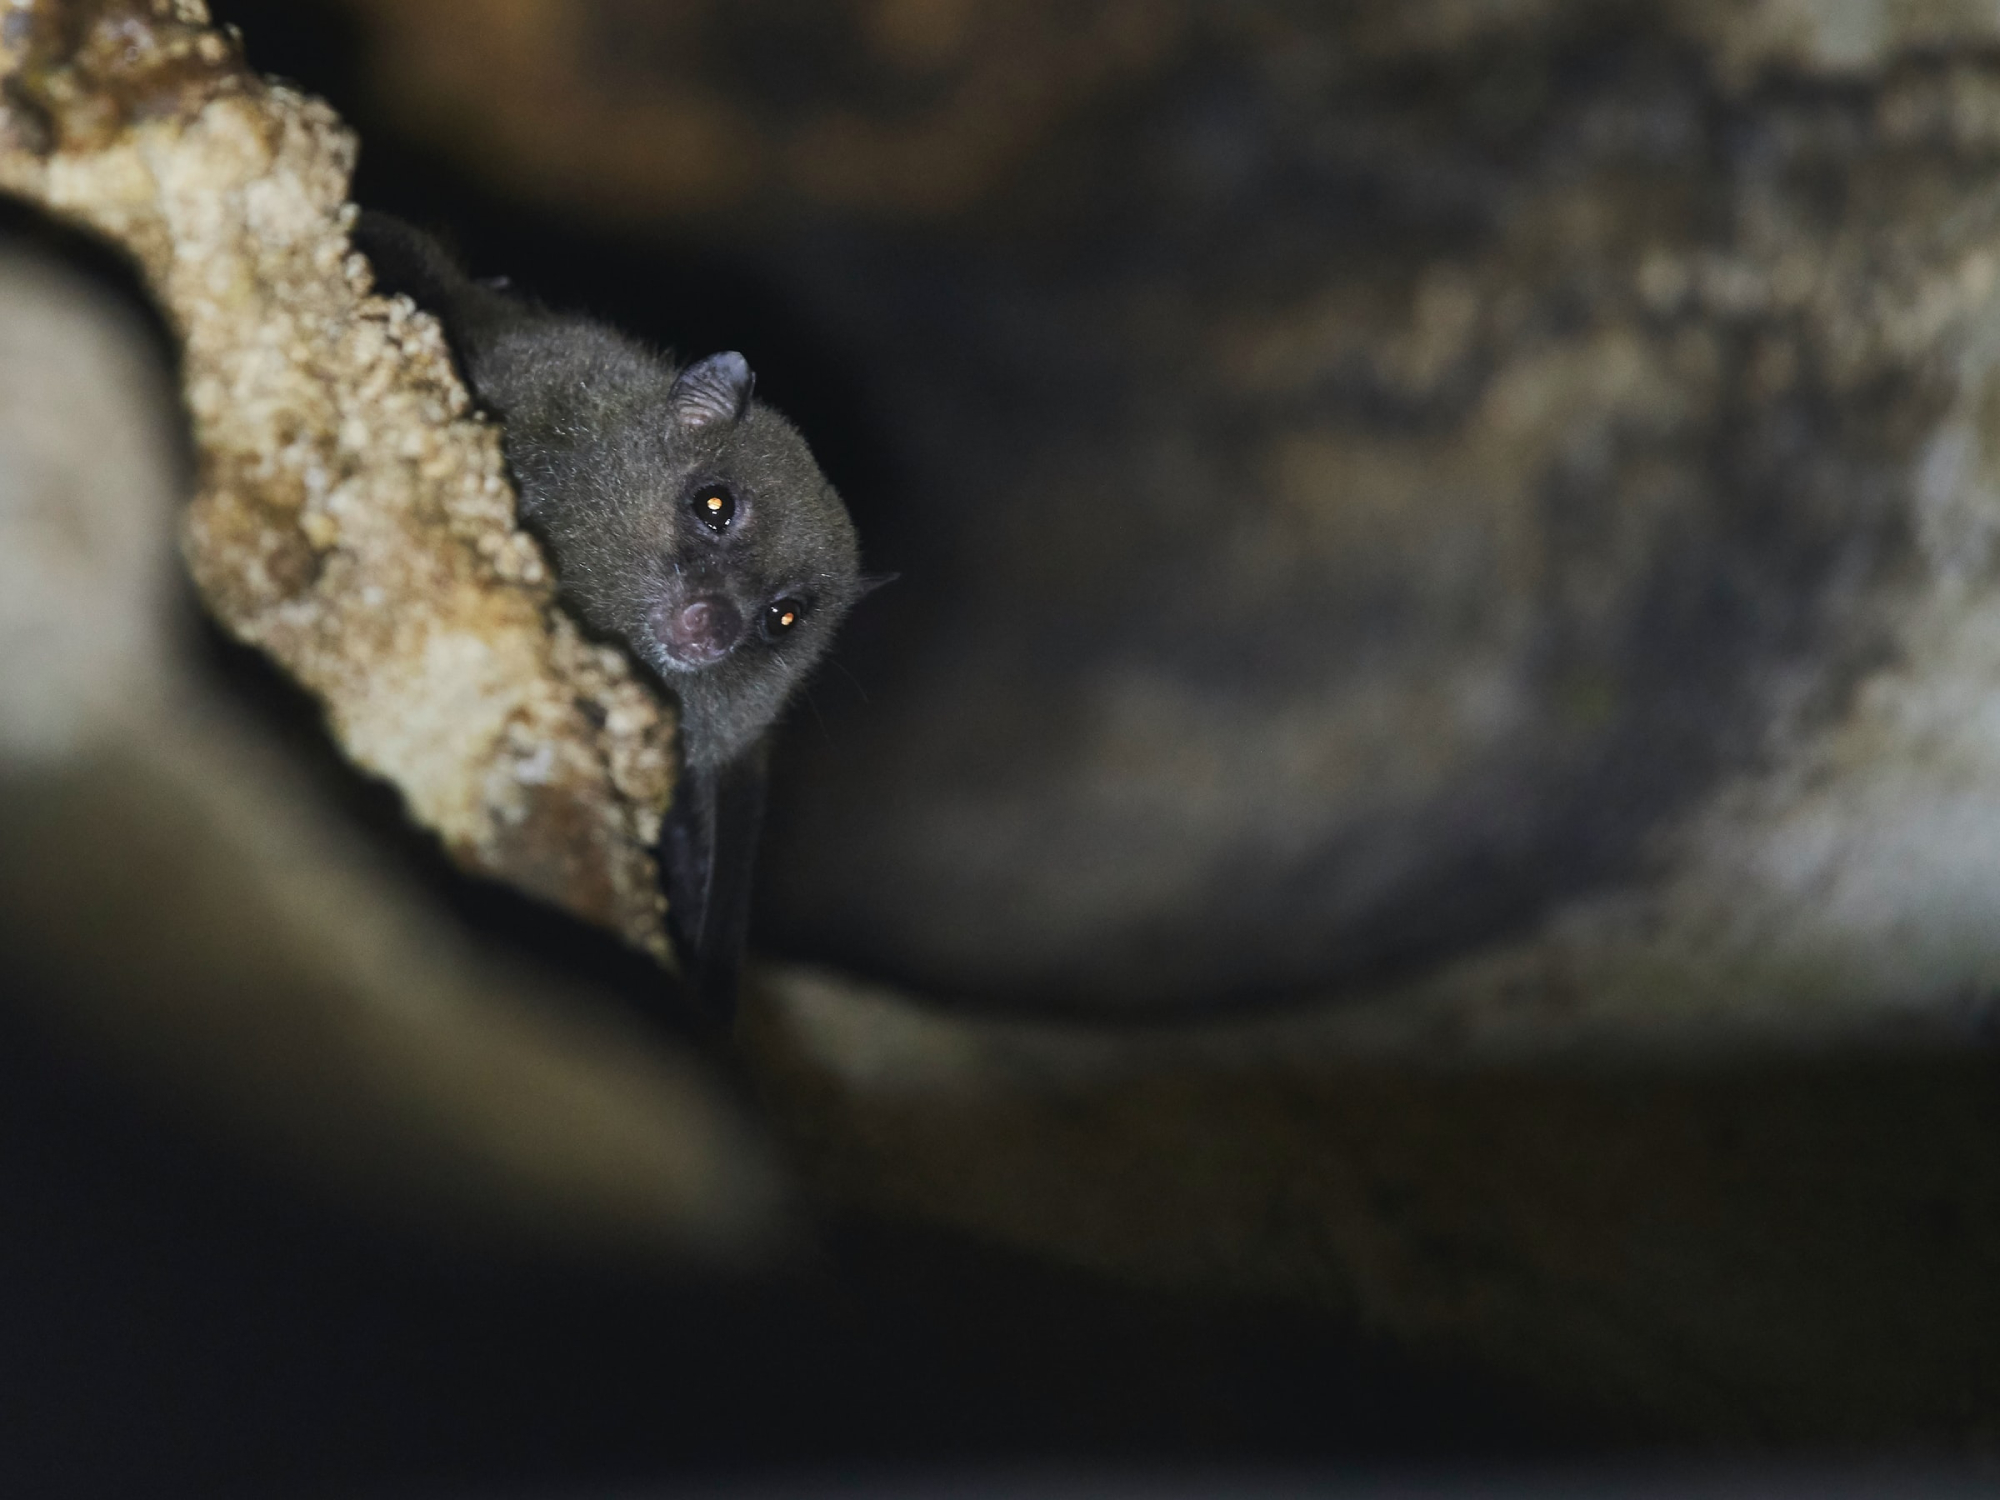 Notopteris neocaledonica, the New Caledonia blossom bat, an endangered bat species endemic to New Caledonia.